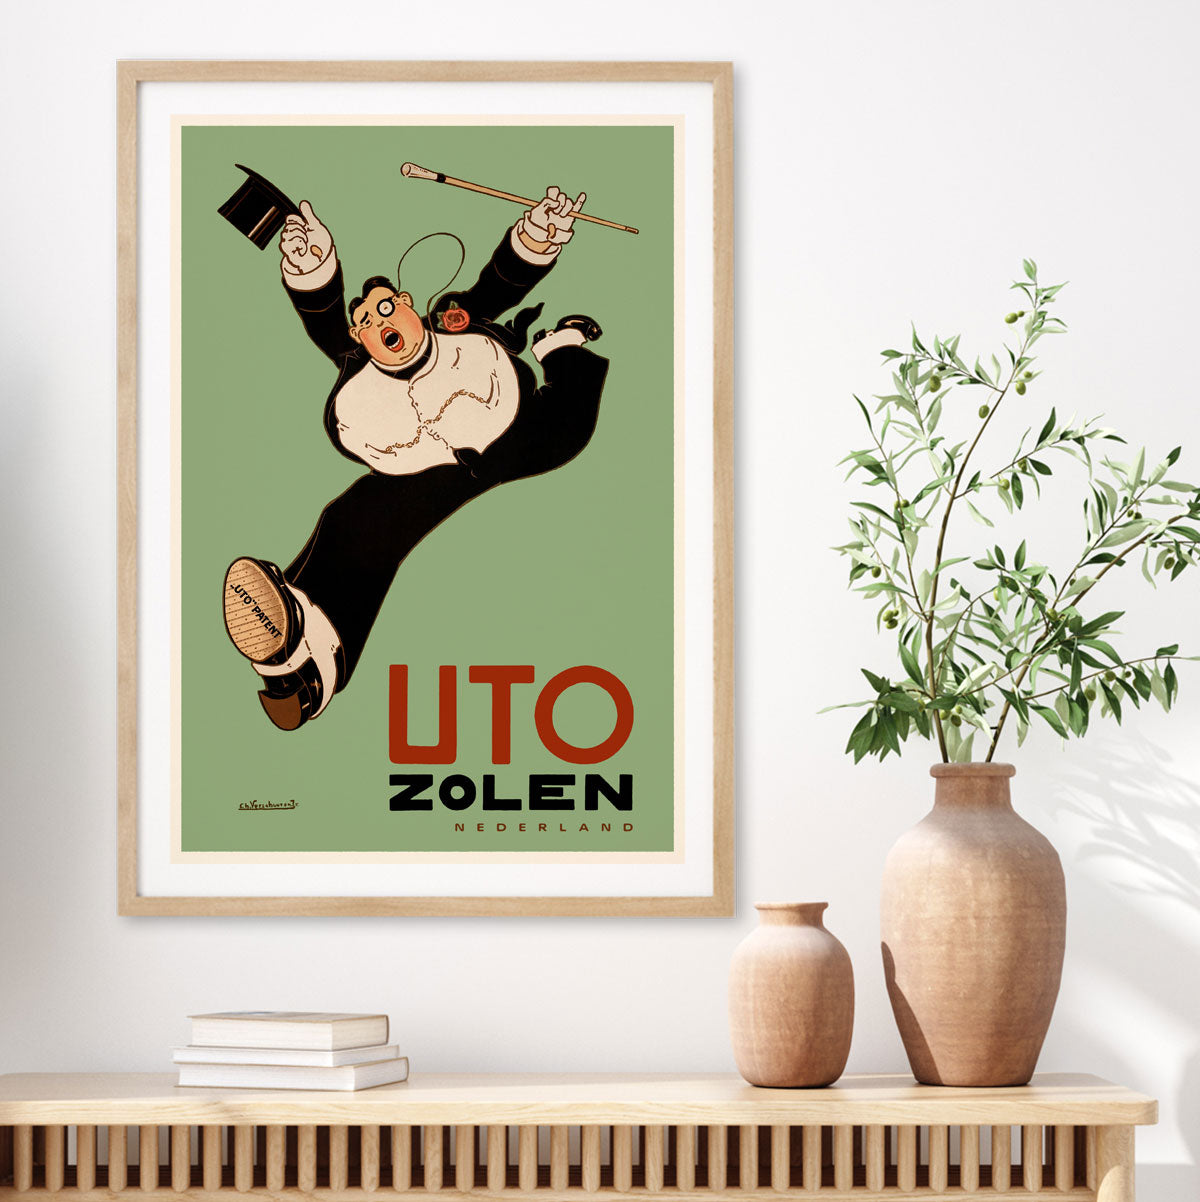 Uto Zolen The Netherlands retro vintage poster from Places We Luv